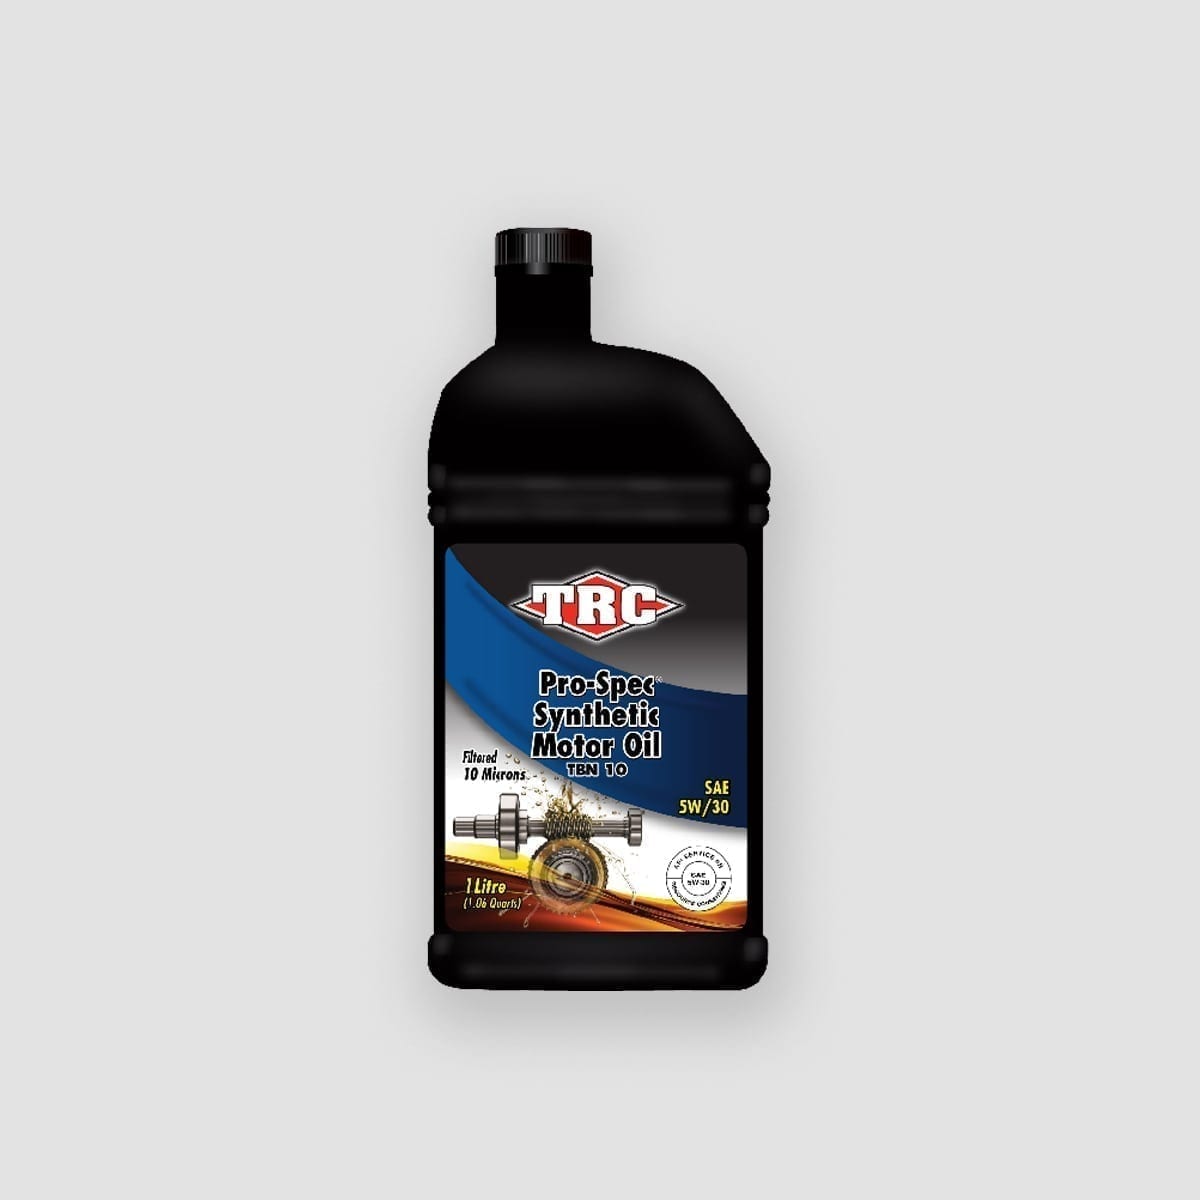 pro-spec-synthetic-motor-oil-sae-5w-30-02